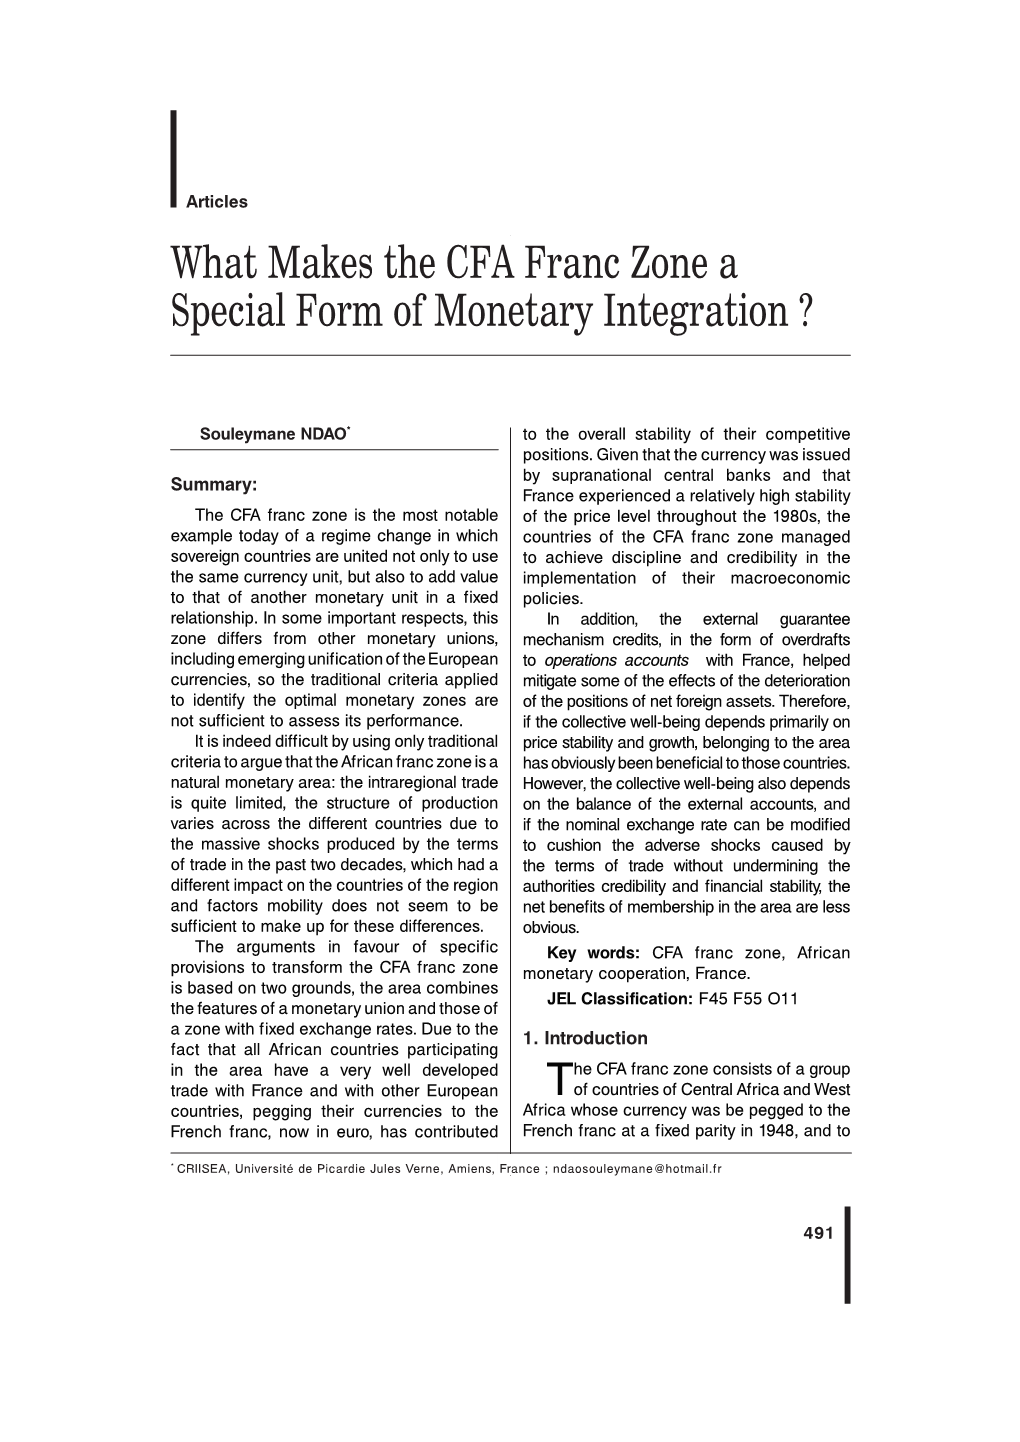 What Makes the CFA Franc Zone a Special Form of Monetary Integration ?